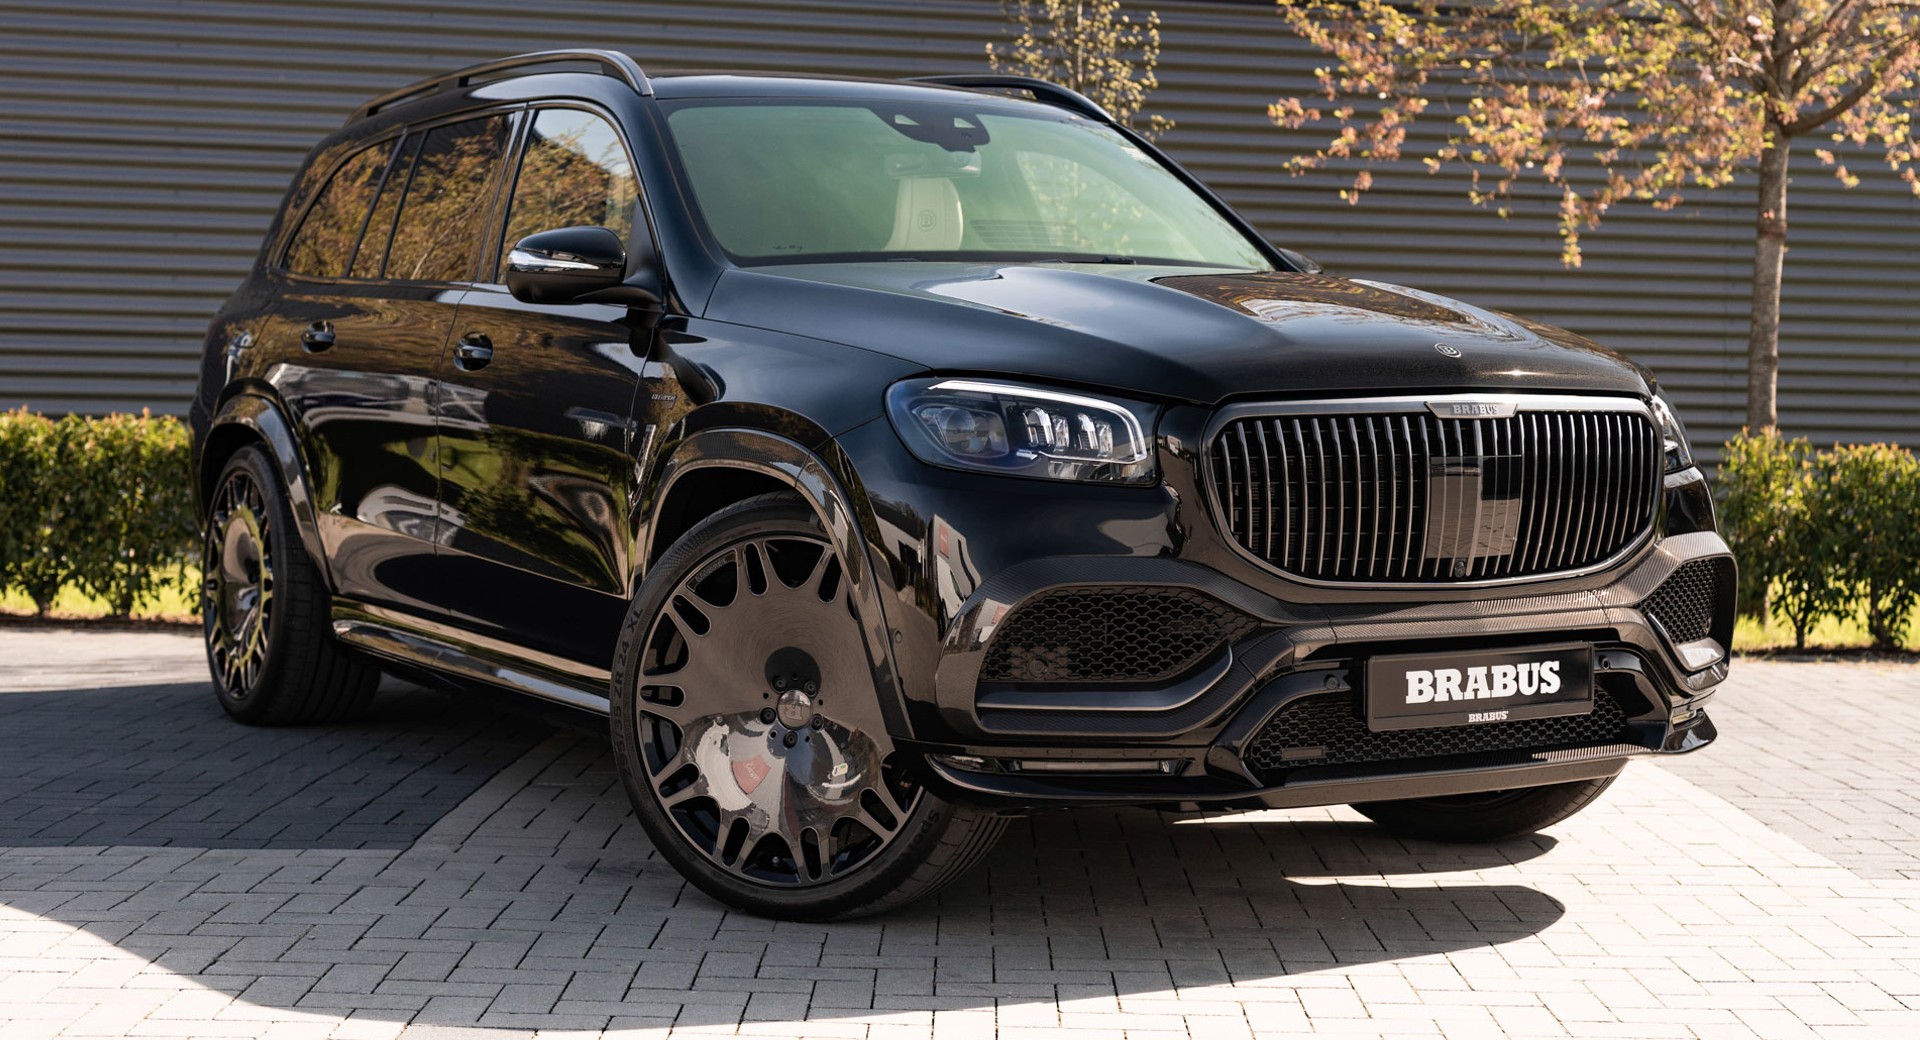 Brabus Takes The Mercedes-Maybach GLS To Another Level With 888 HP